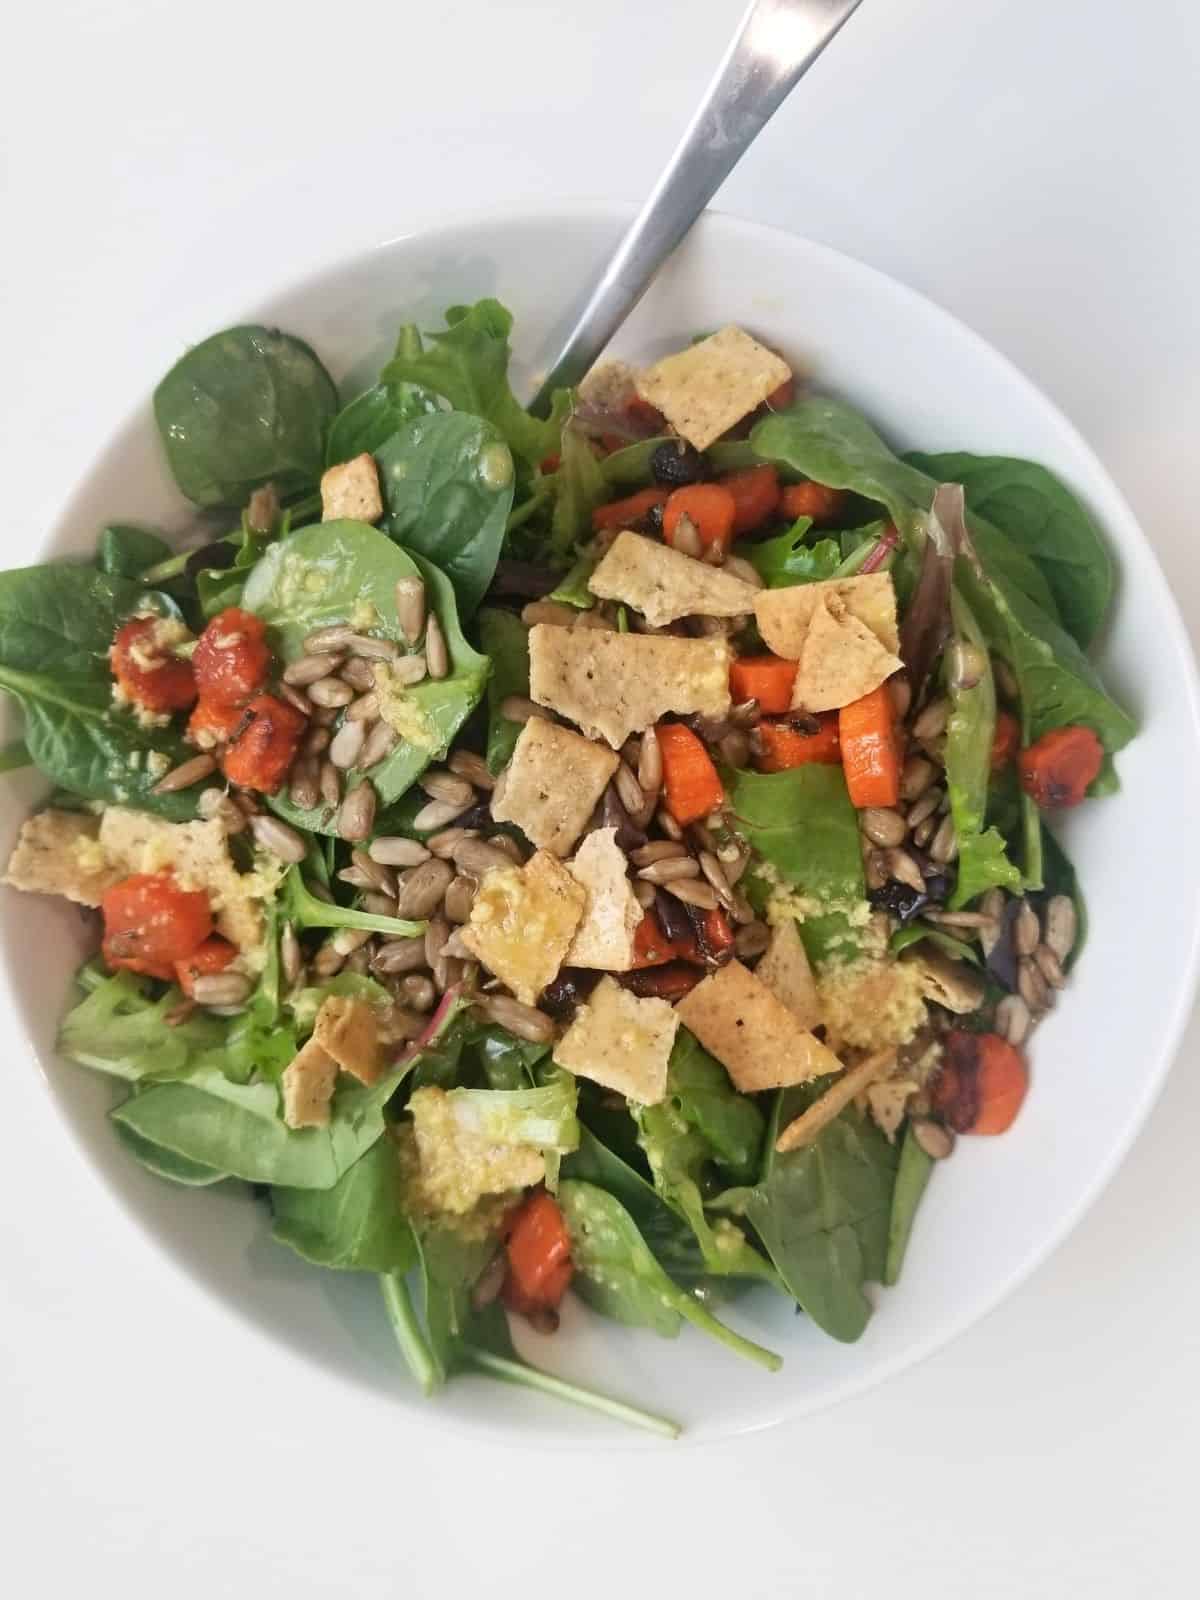 vegetable salad, topped with crackers, seeds, and lemon ginger dressing, in a bowl.